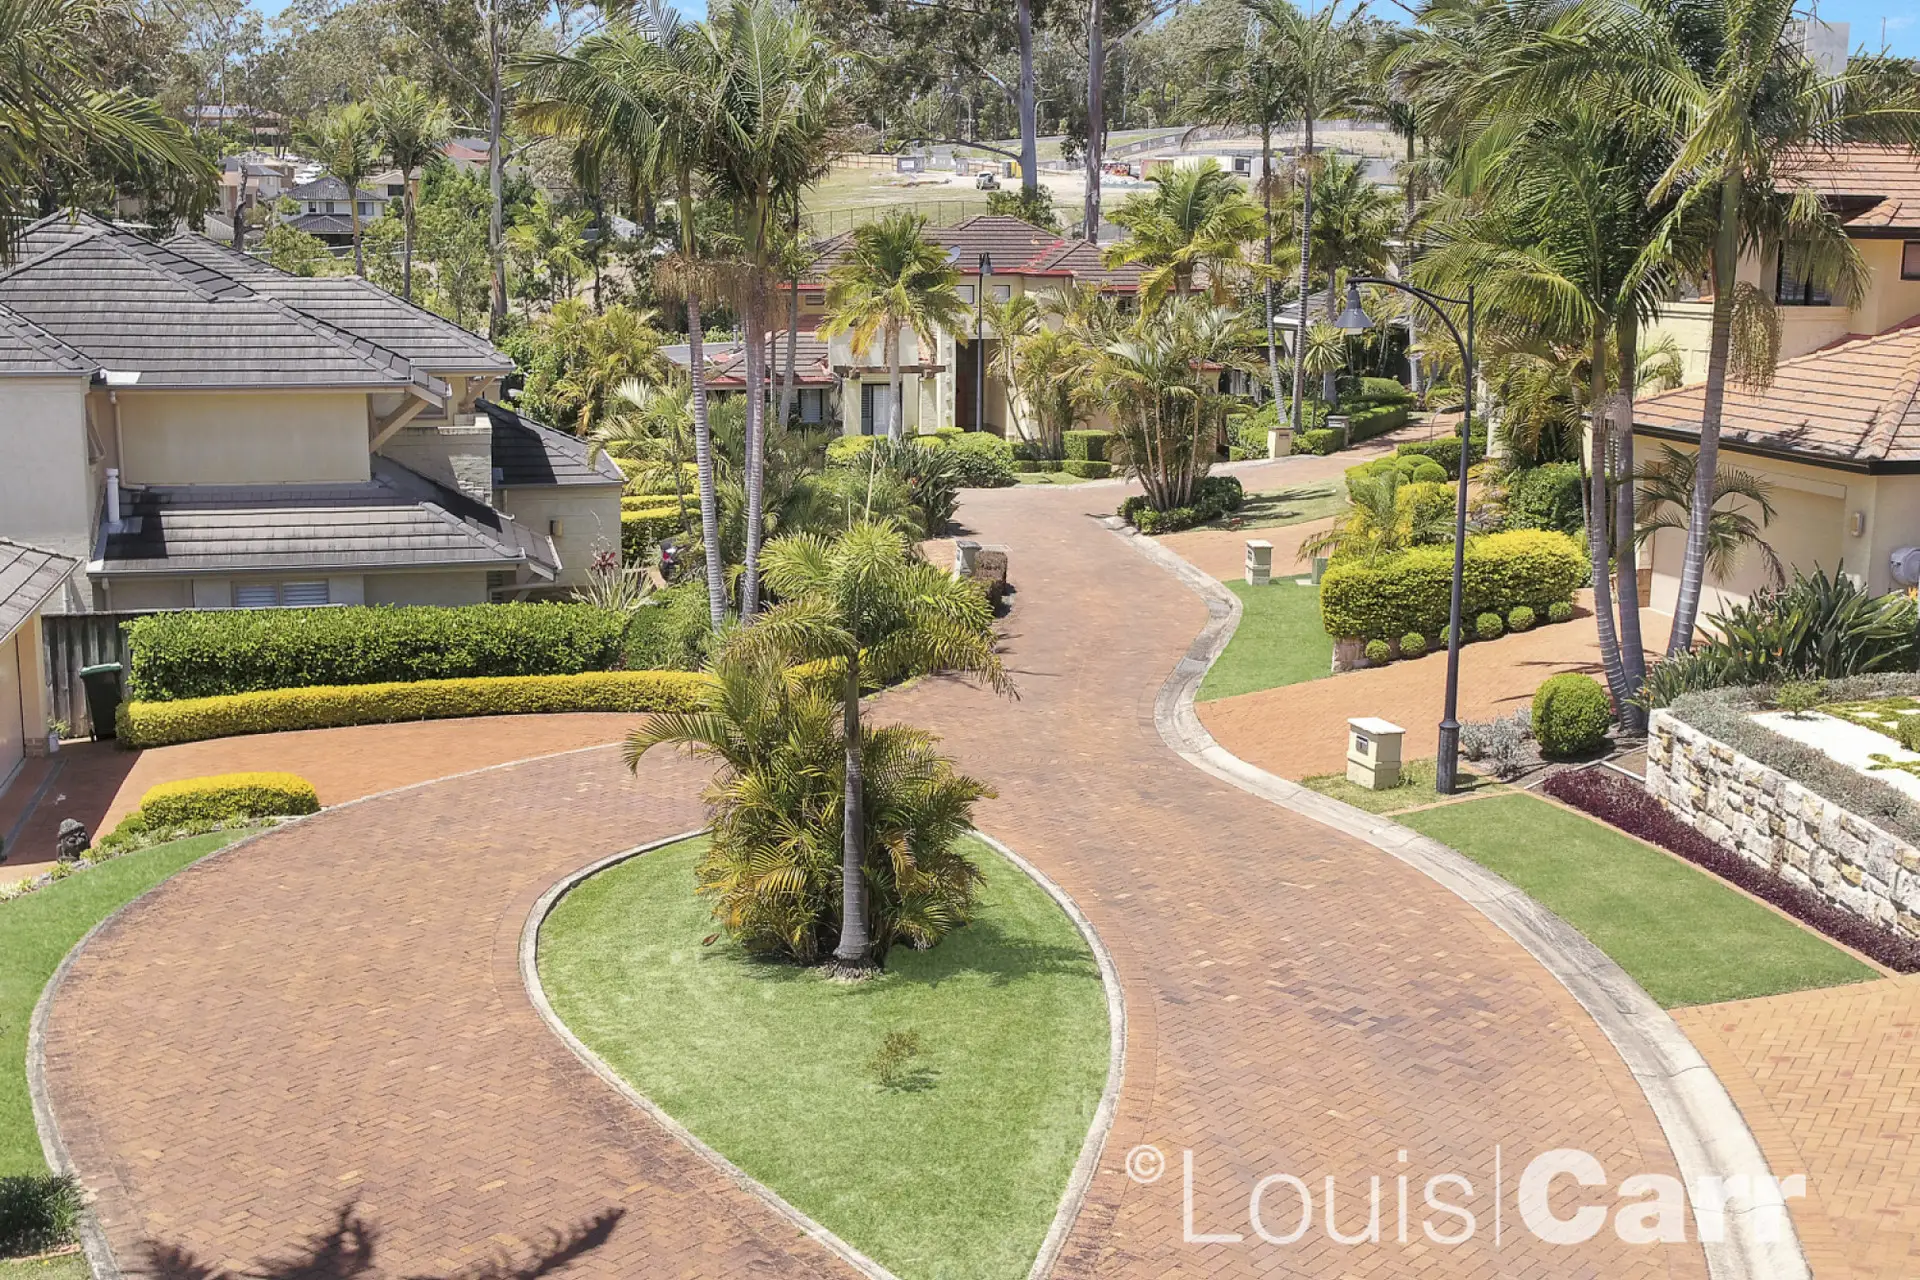 Photo #11: 16 Oliver Way, Cherrybrook - Sold by Louis Carr Real Estate